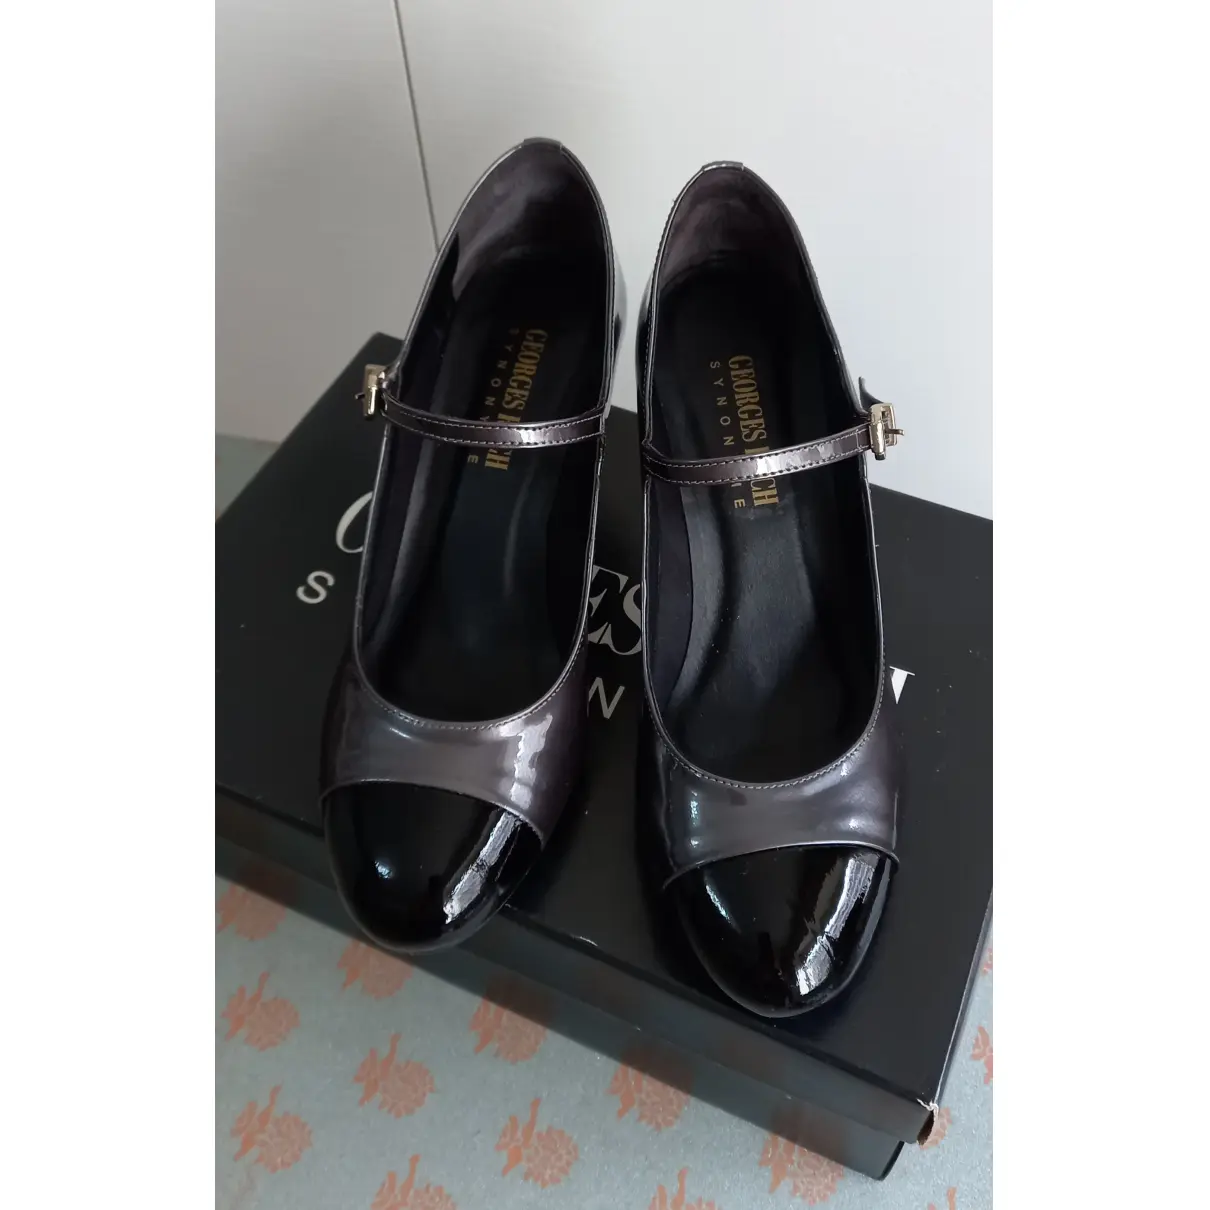 Buy Georges Rech Patent leather heels online